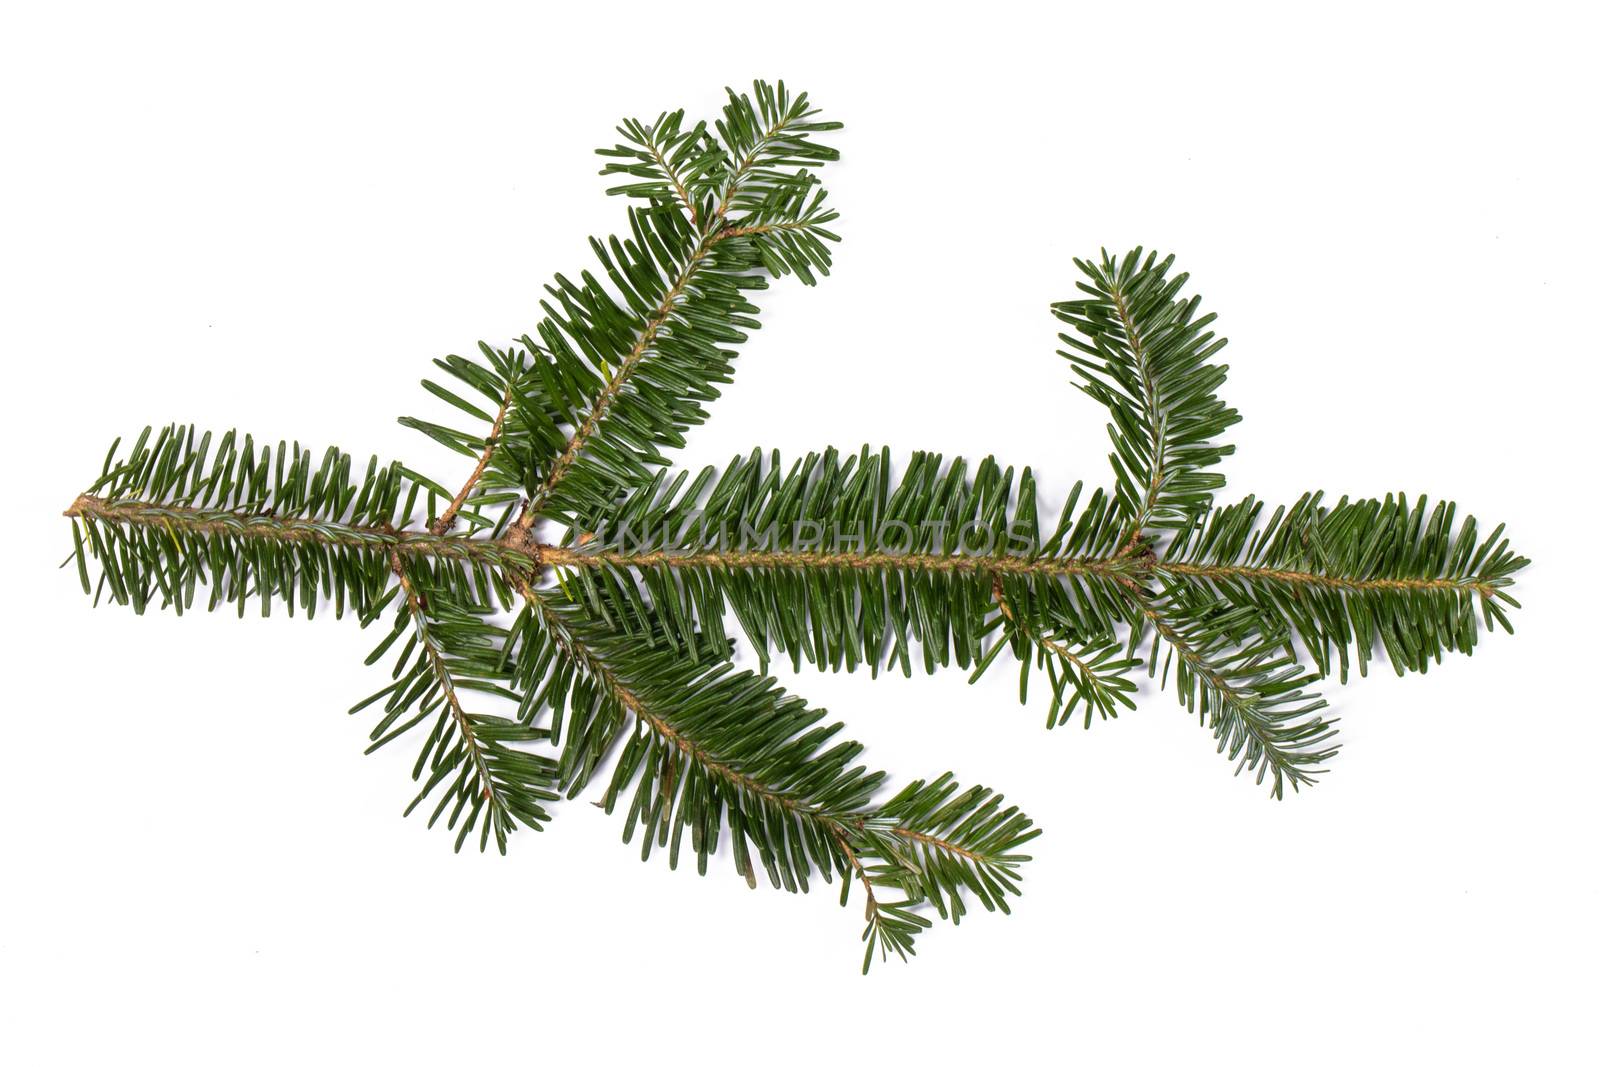 Evergreen christmas fir pine tree branch isolated on white background for design